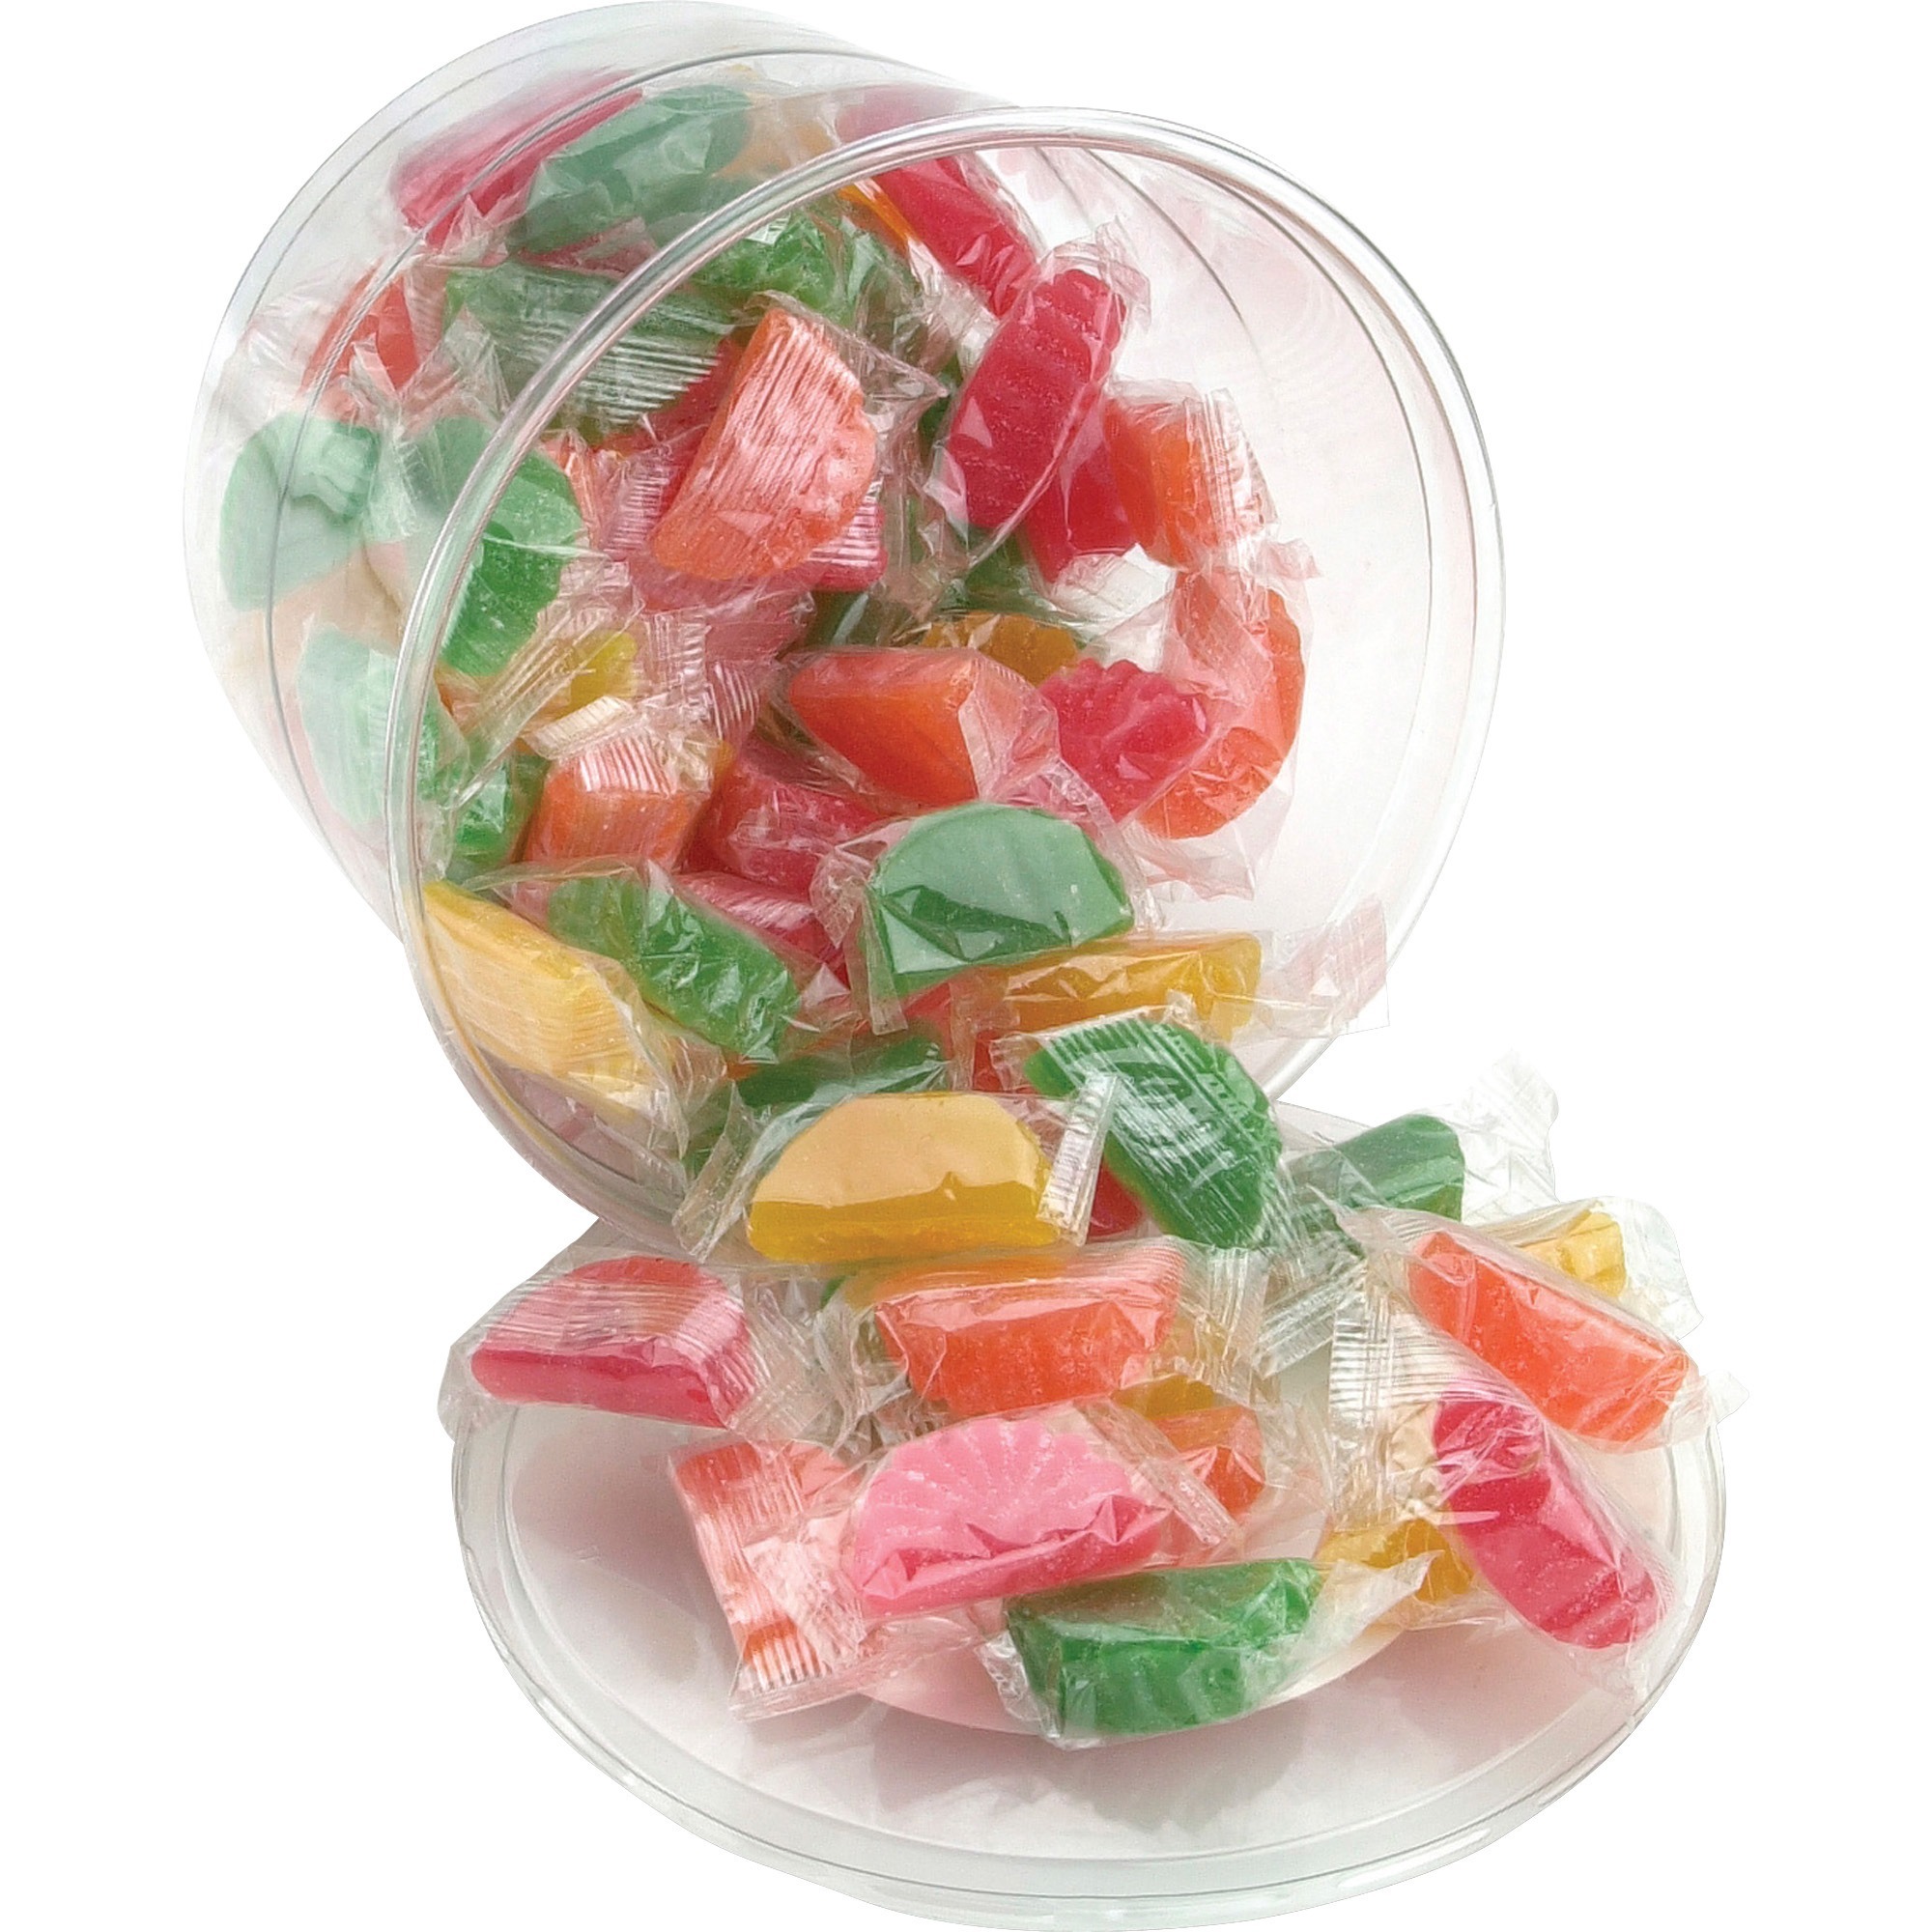 Office Snax, OFX00005, Fruit Slice Assorted Flavor Candy Tub, 1 Each - image 1 of 2